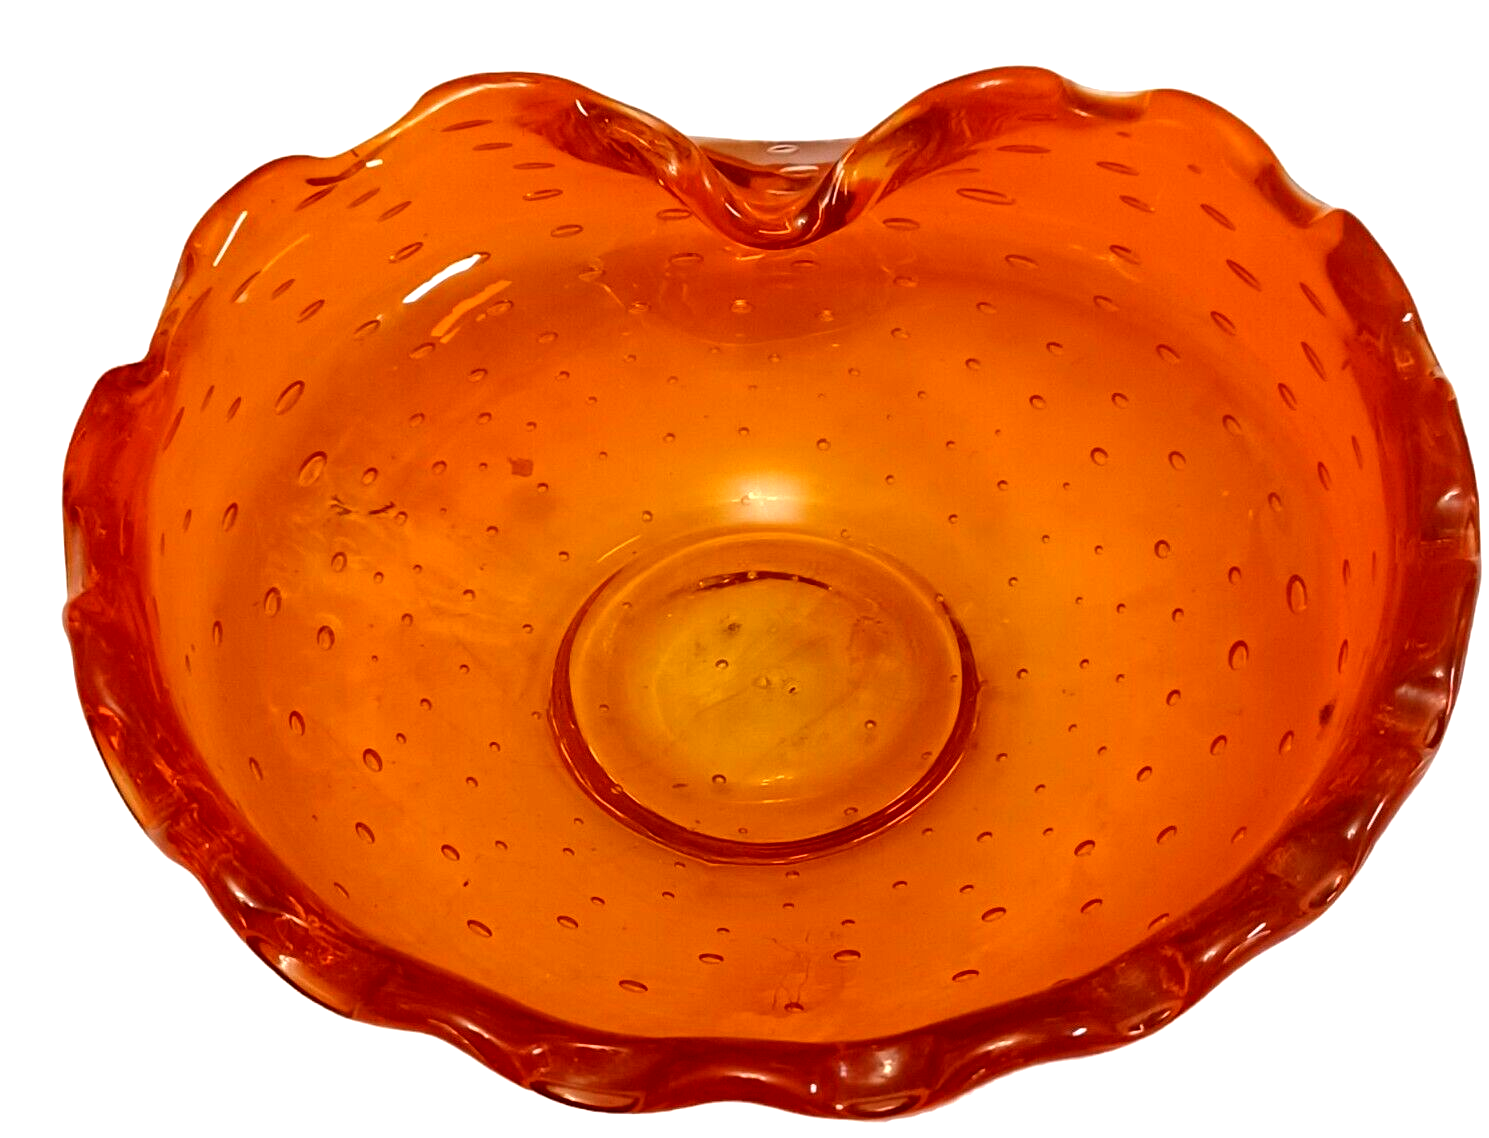 Primary image for Vtg Murano Italy Controlled Bubble Orange Glass Ashtray Bowl 6"